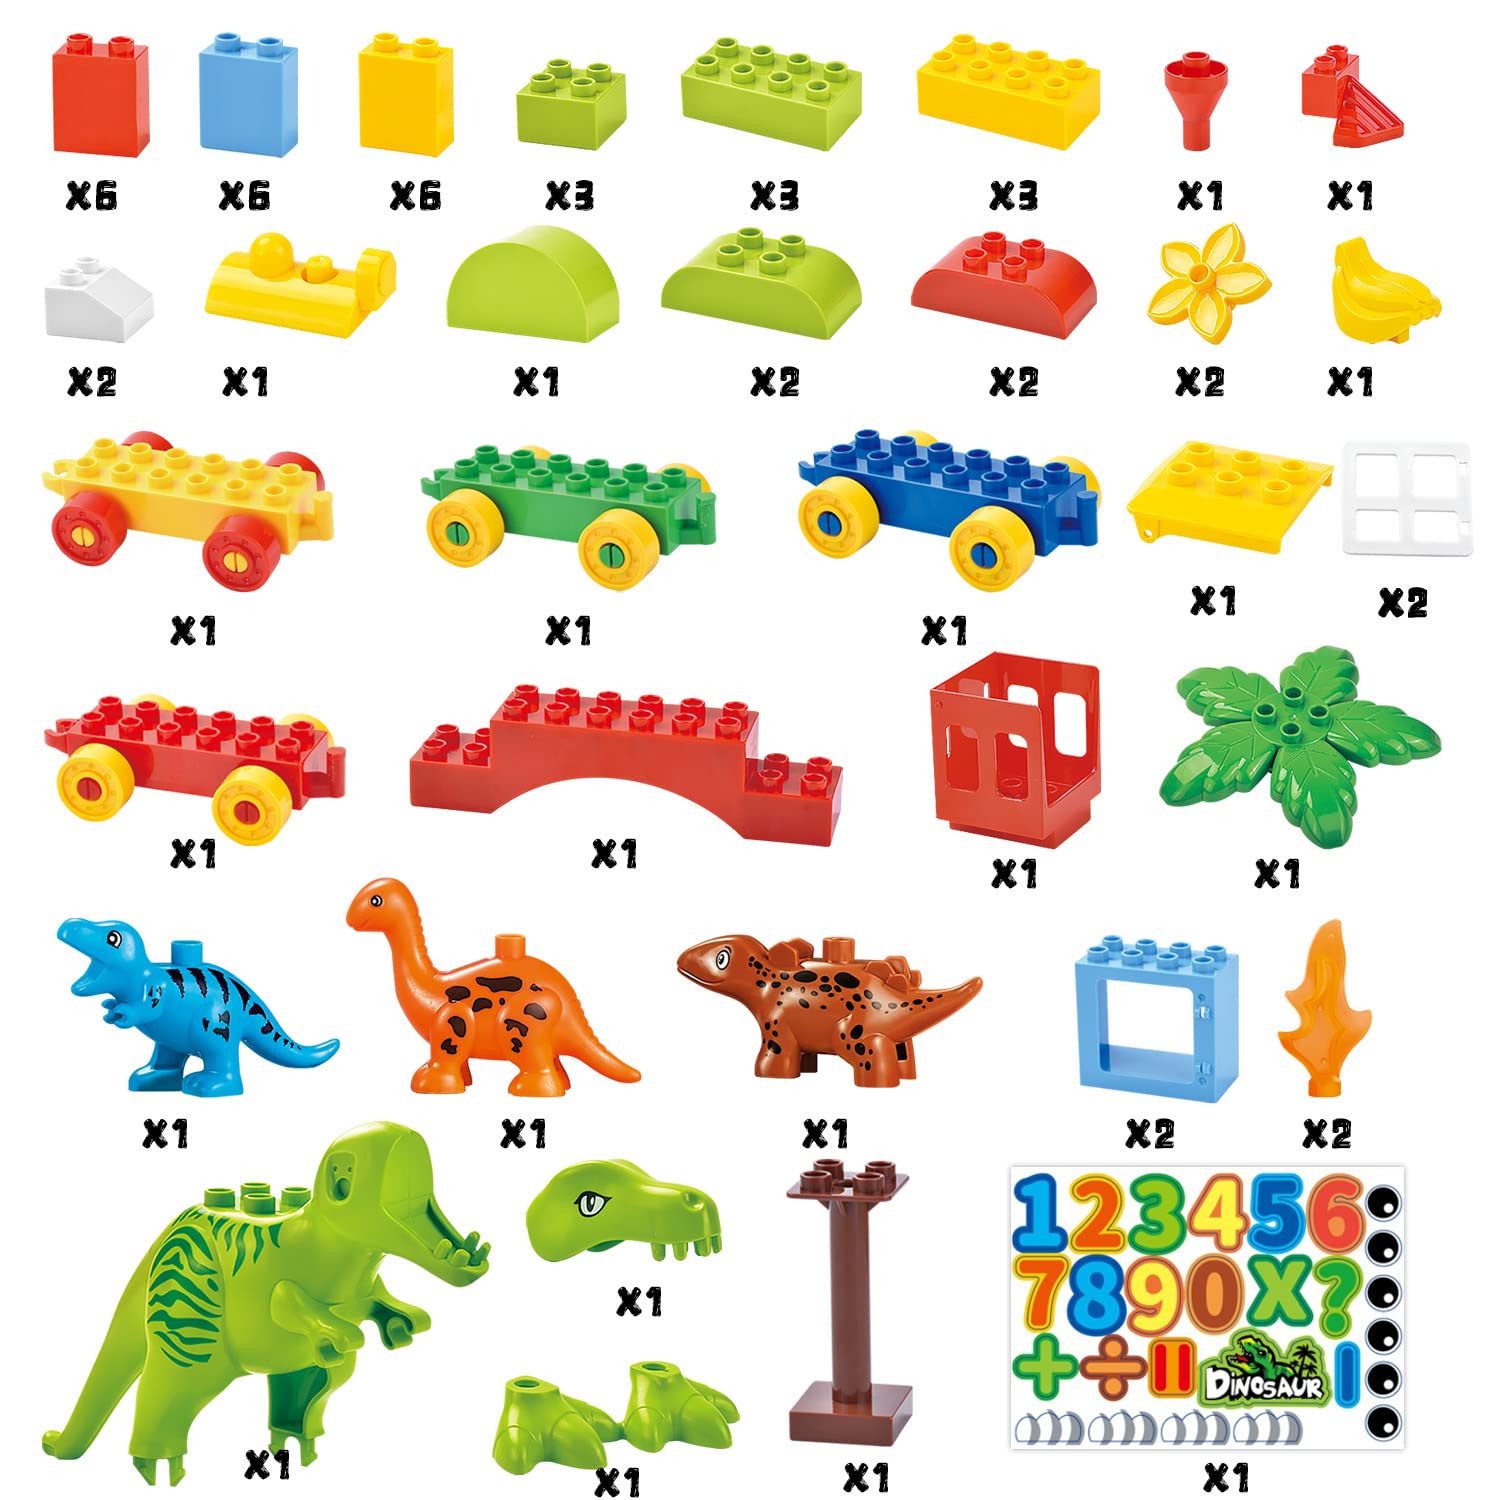 Dinosaur Building Blocks Toys,Jurassic Theme Building Blocks,with A Counting Train,A Big T-rex,and Three Dinosaurs,Compatible with All Major Brands, Gift for Kids Toddlers Boys Girls Age 3,4,5,6,7,8+